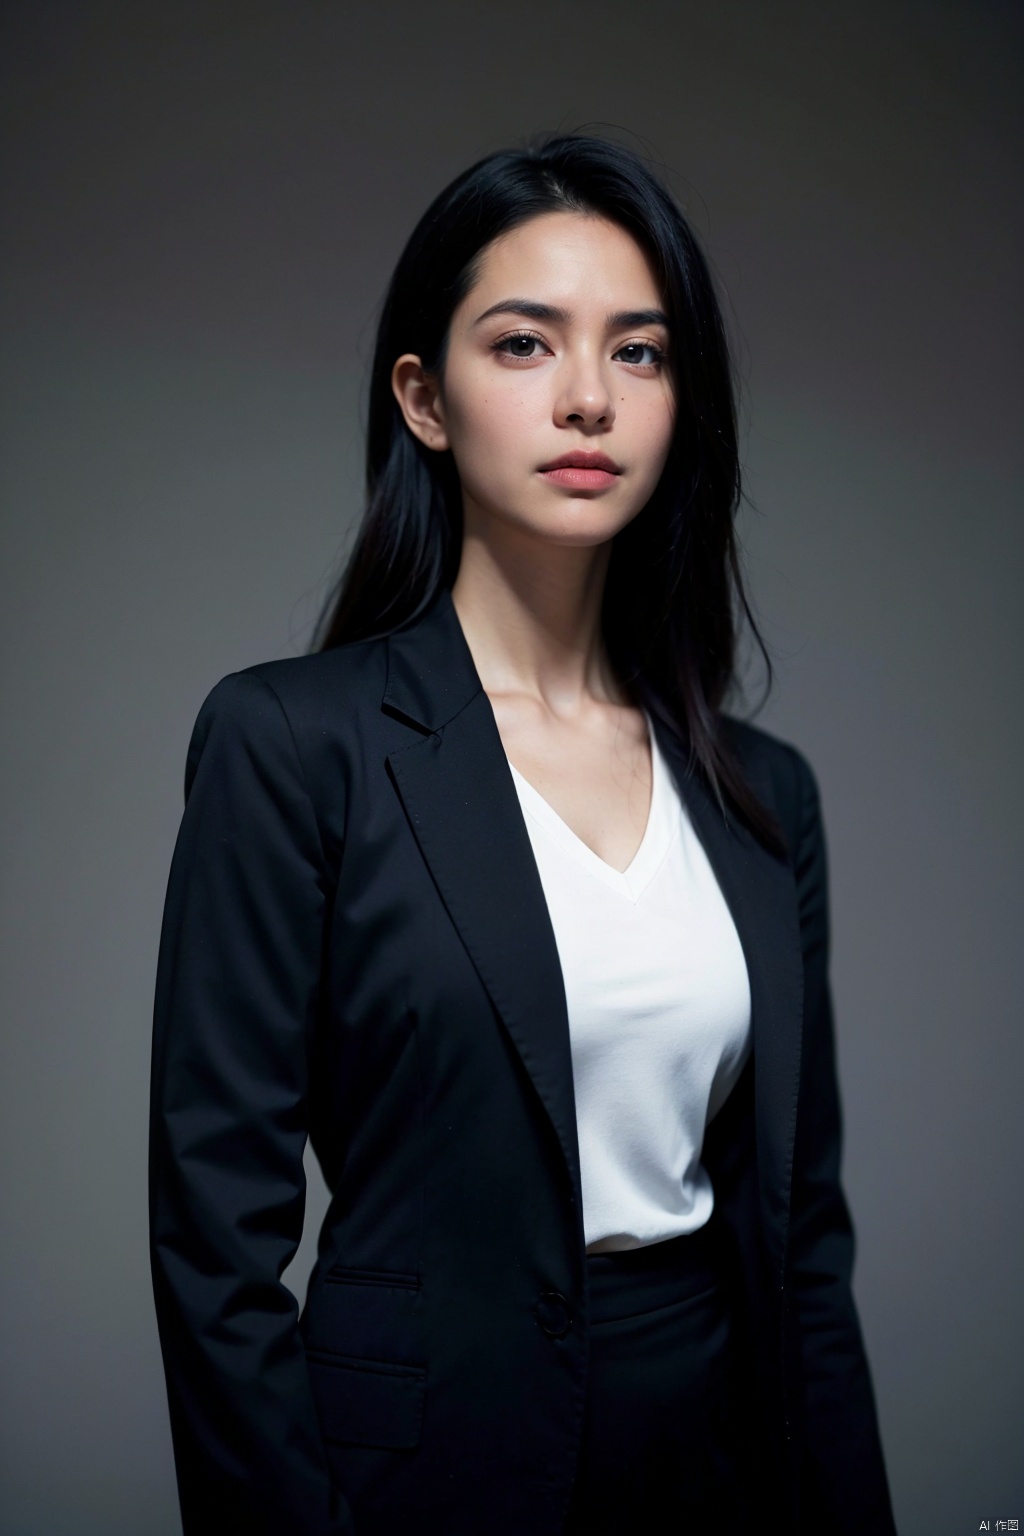 In a compelling and powerful portrait echoing the iconic style of Annie Leibovitz, we find a young professional woman standing against an unassuming monochromatic backdrop. She is captured in her element, exuding confidence and ambition in her tailored business attire—a crisp white shirt beneath a sleek black blazer, accessorized with understated yet elegant jewelry.

Her gaze is fixed beyond the frame, communicating both focus and determination, while her stance is poised and assertive, embodying the spirit of modern-day achievement. The photograph emphasizes the texture and clean lines of her attire, juxtaposed against the simplicity of the background to draw attention to her presence and character.

Render this image with (8K resolution, best quality: 1.5), (crisp detail on clothing textures: 1.7), (sharp focus on facial expression: 1.9), (subtle, directional lighting to highlight contours: 2.0), (monochromatic background for maximum subject contrast: 1.3), (precise composition that underscores professionalism and femininity: 1.6), (cinematic color grading that enhances mood without distraction: 1.8), (gestural nuances that convey strength and poise)., ((poakl))